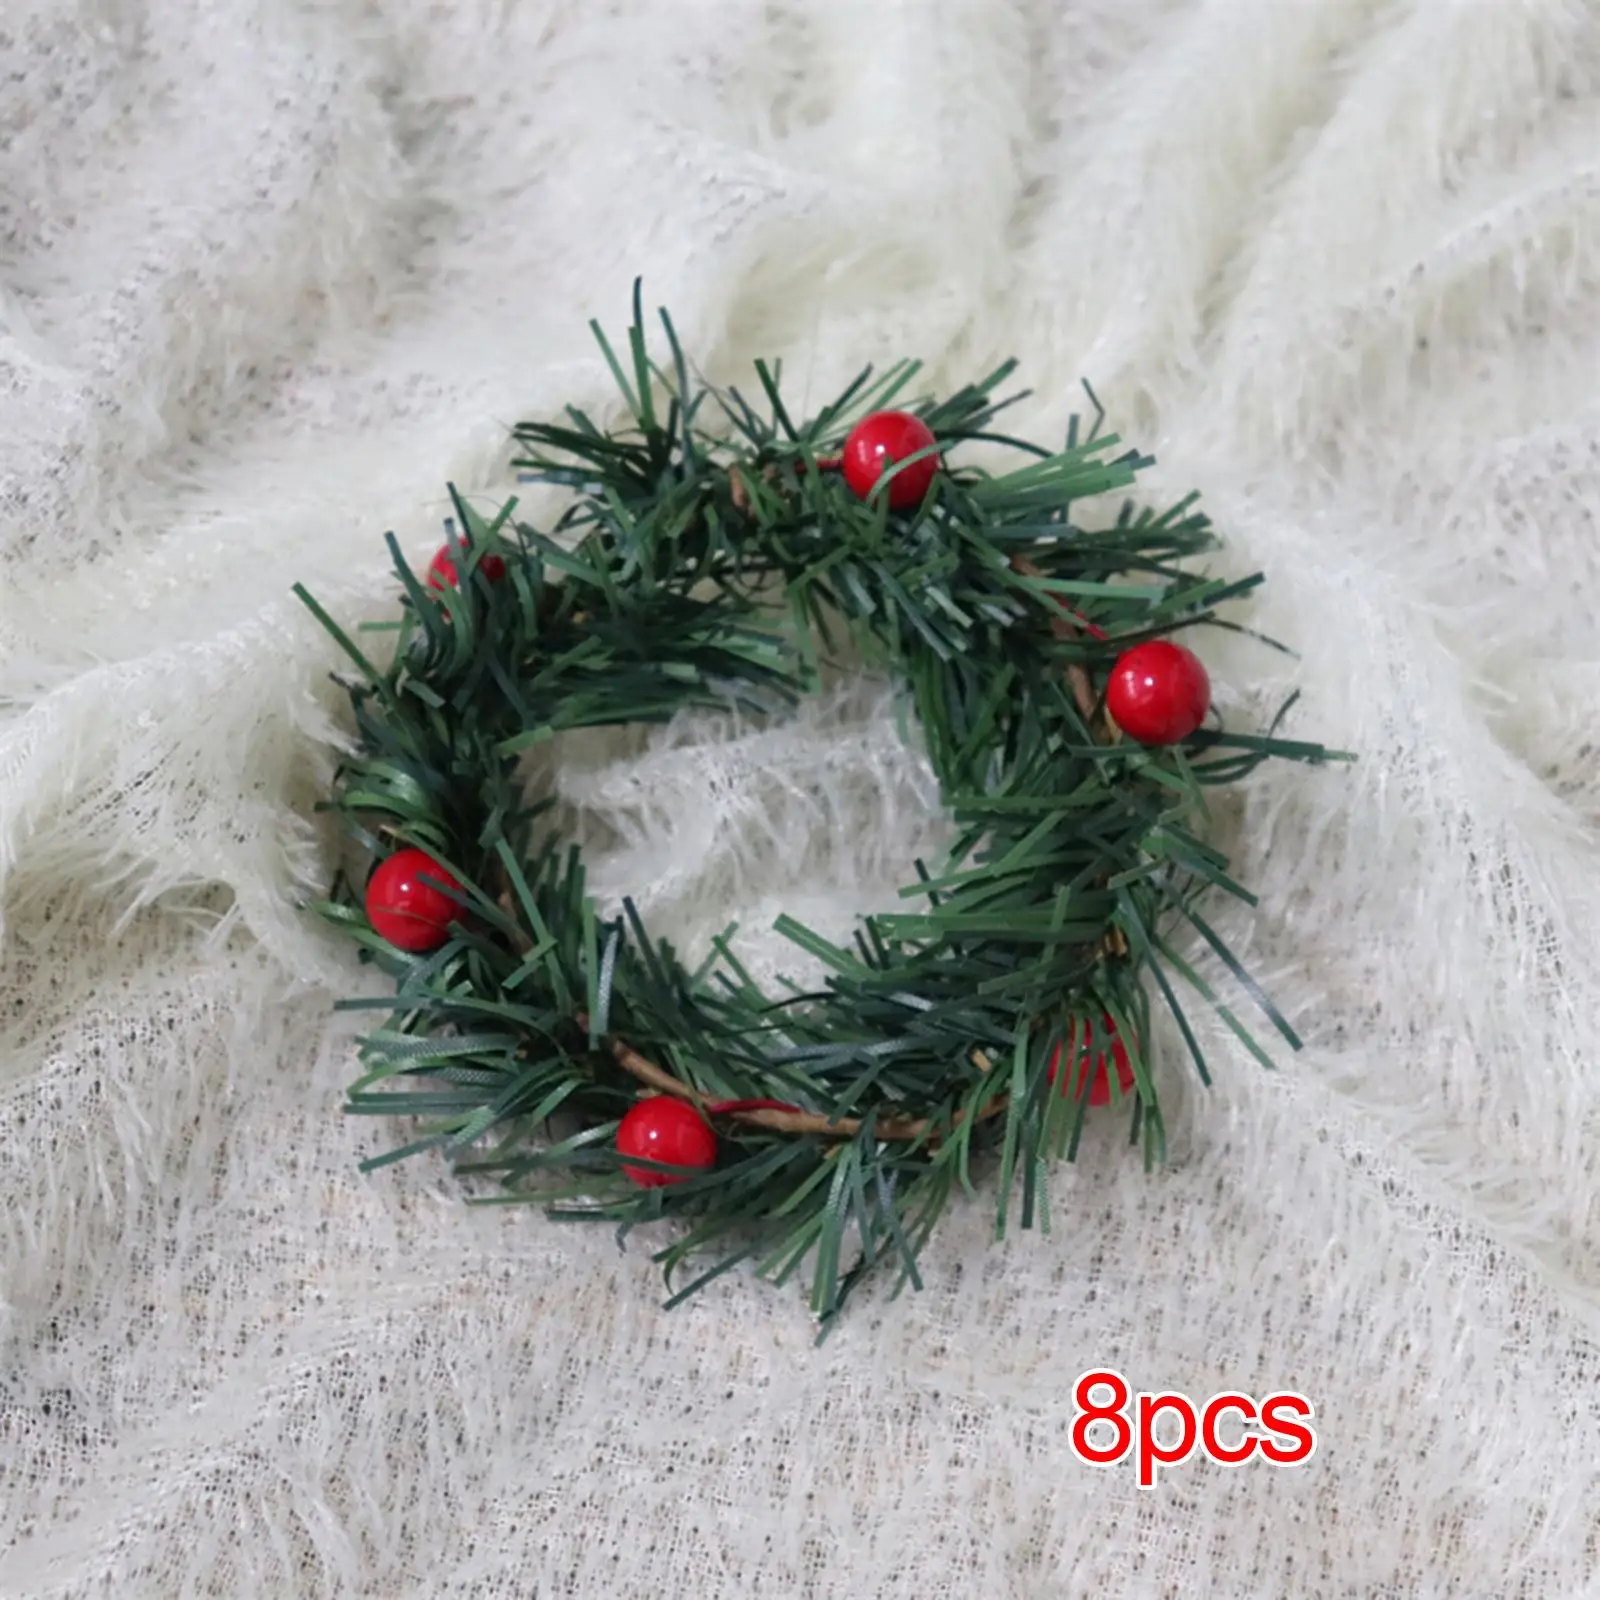 8Pcs Candle Ring Wreath Floral Arrangement Artificial Garland Greenery Wreath for Home Easter Centerpieces Tabletop Ornament